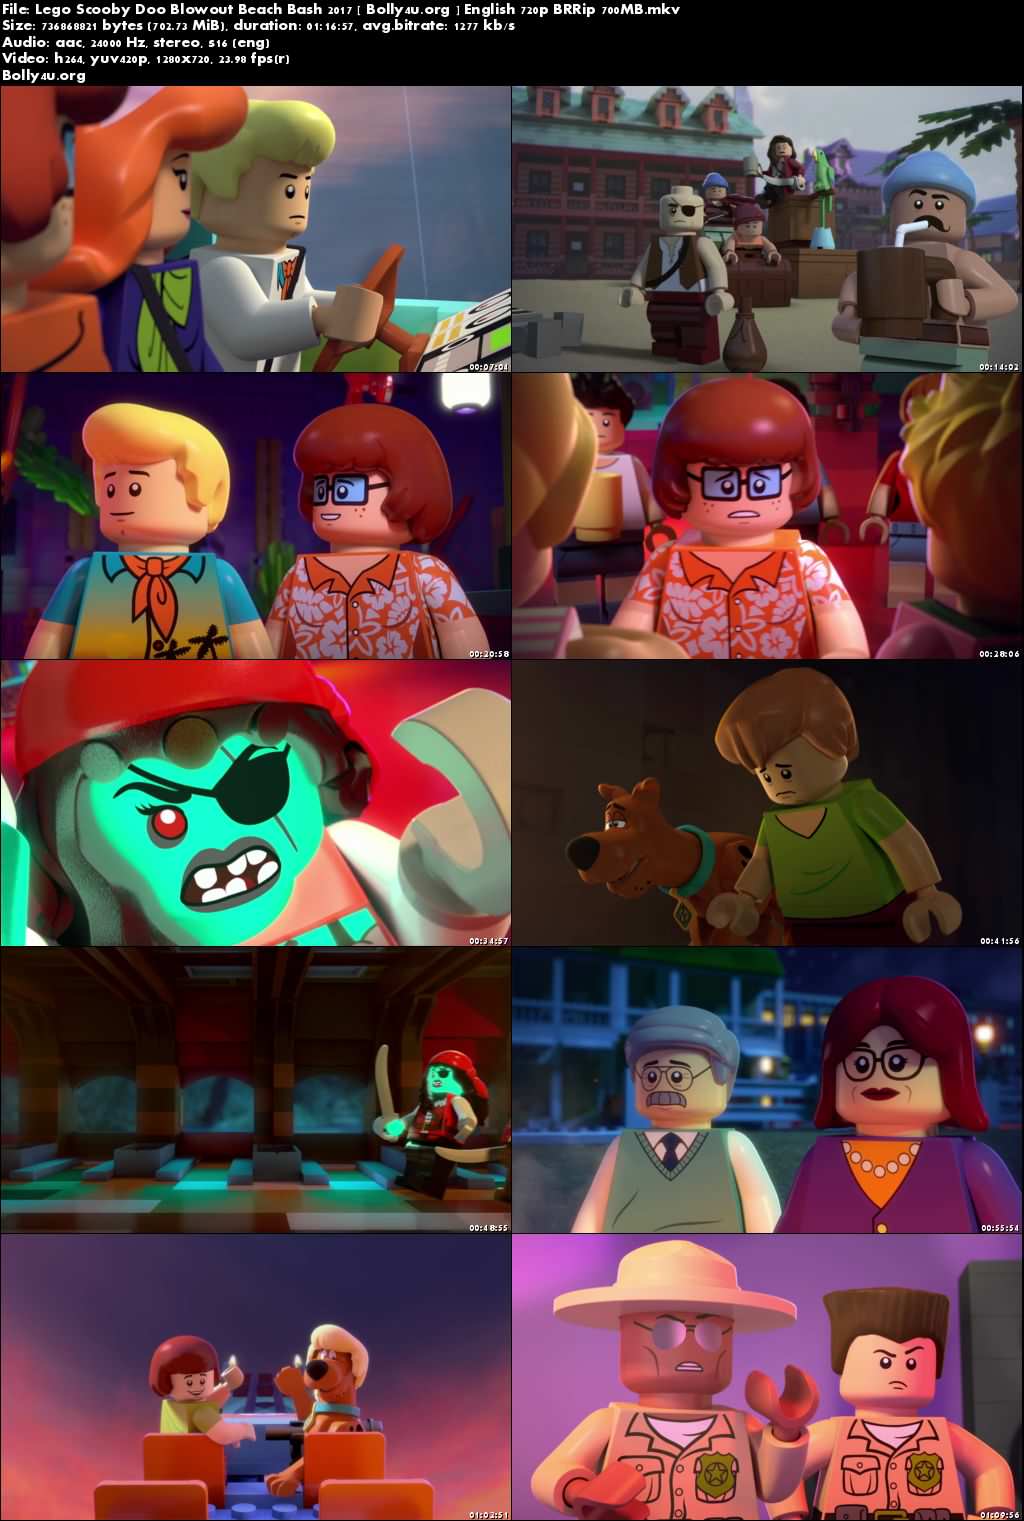 Lego Scooby Doo Blowout Beach Bash 2017 BRRip 700MB English 720p Download